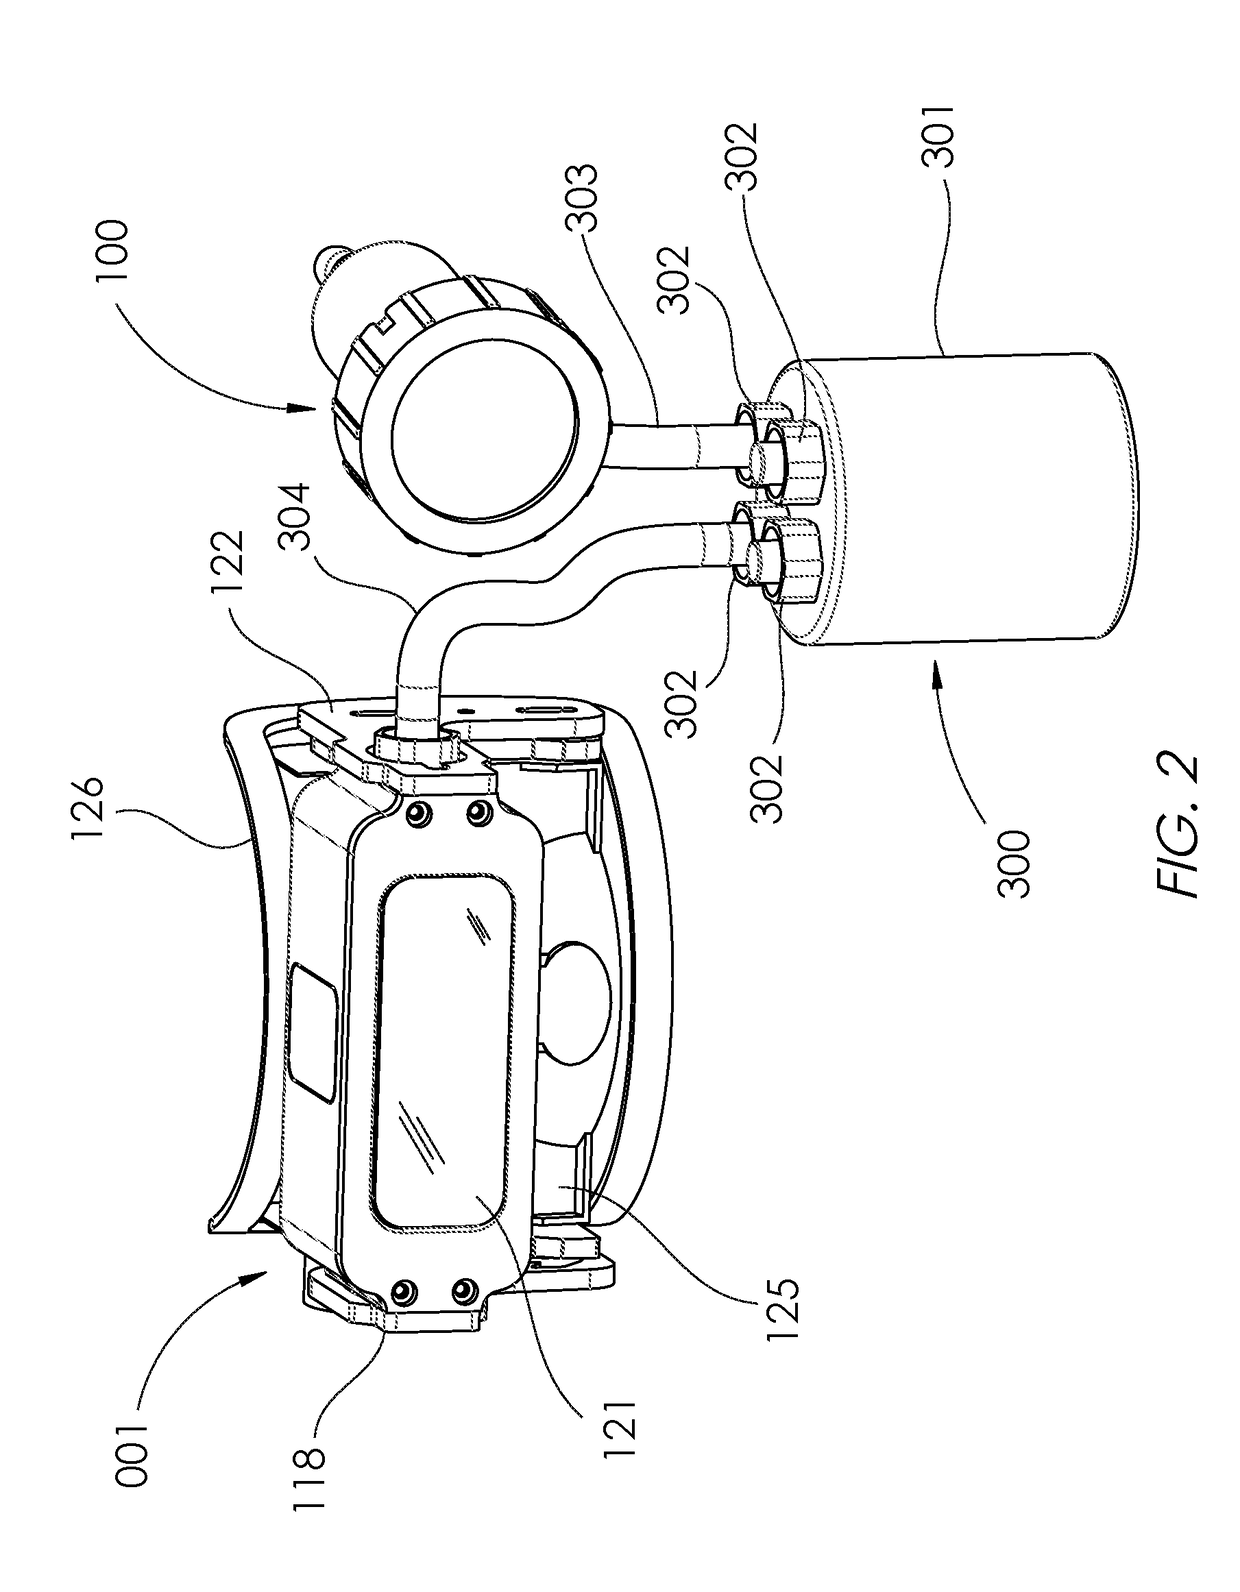 Vision enhancing system and method